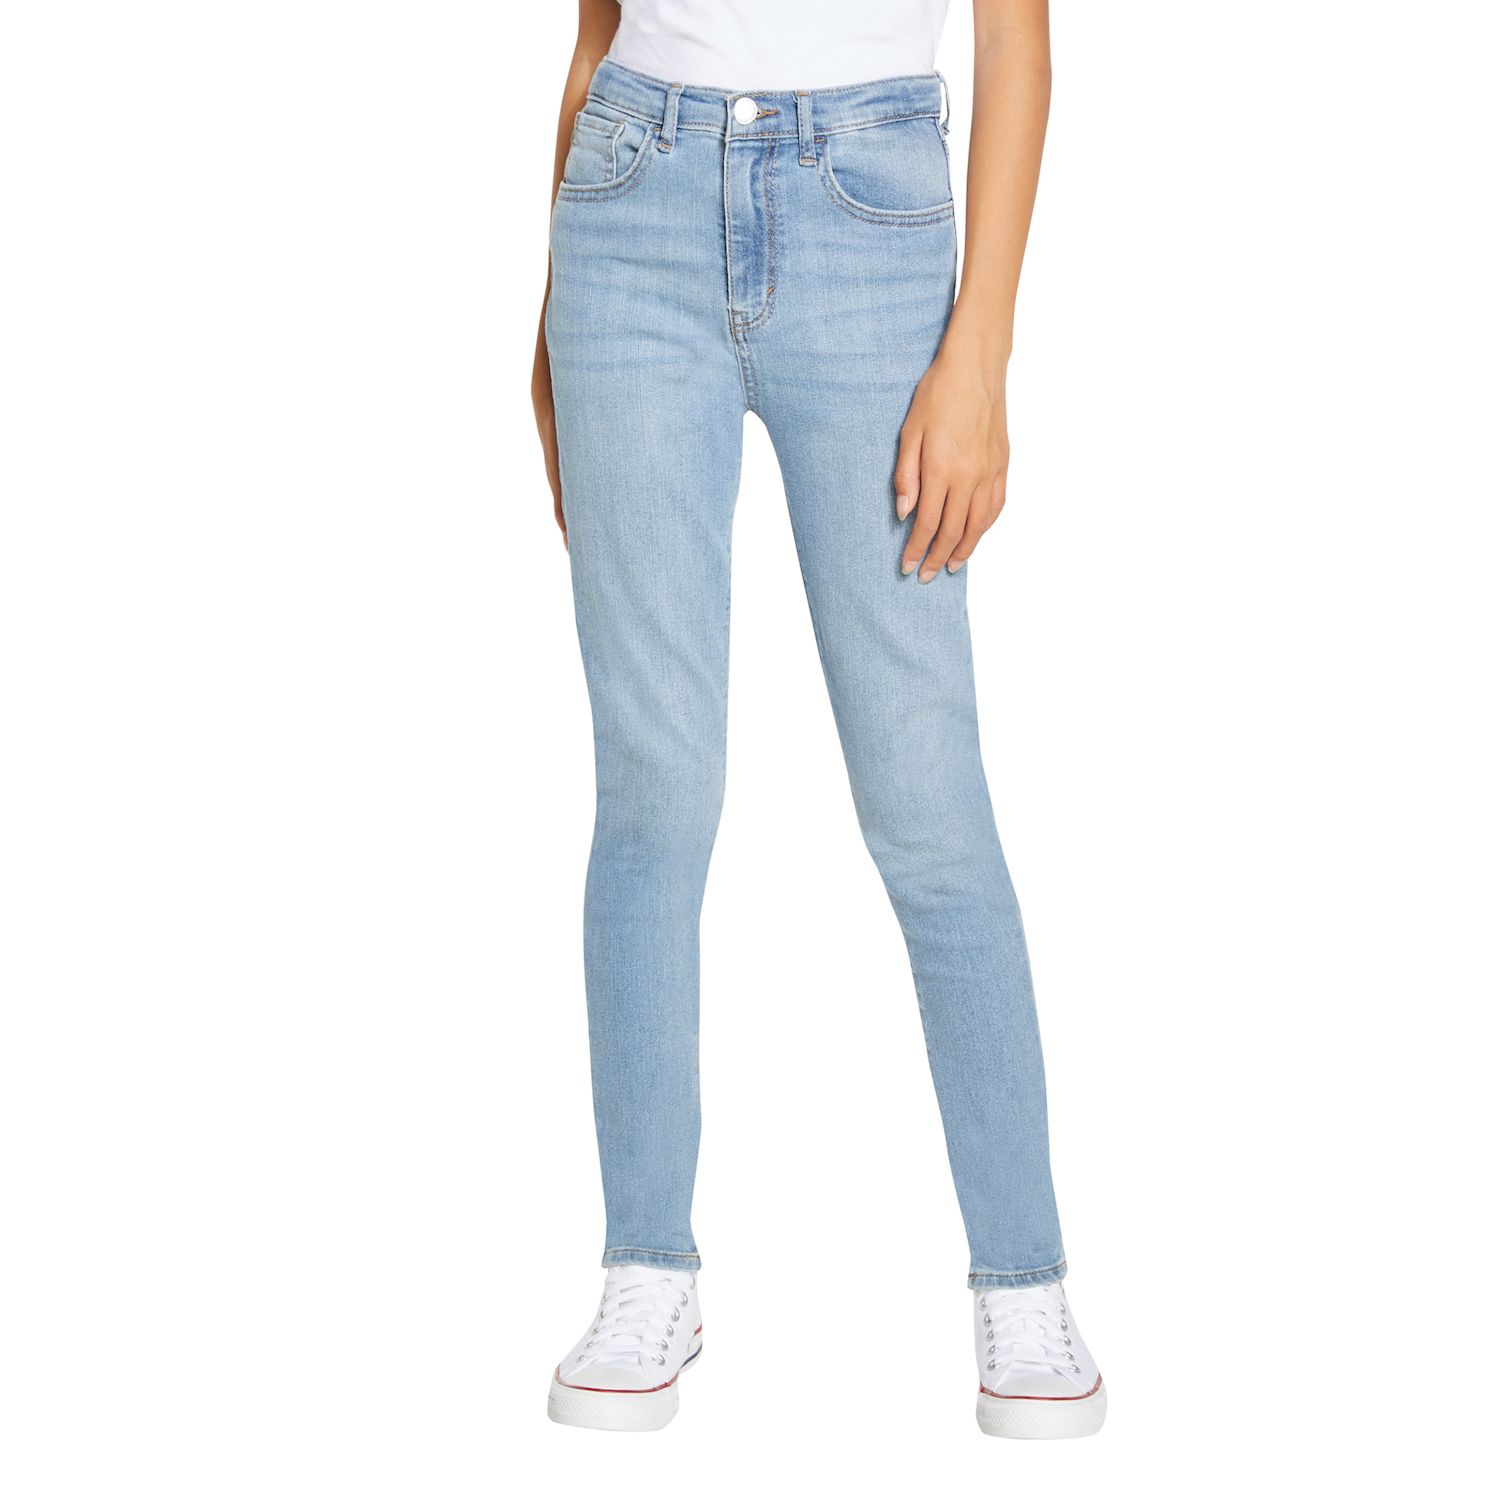 Image for Levi's Girls 7-16 720 High Rise Super Skinny Jeans at Kohl's.